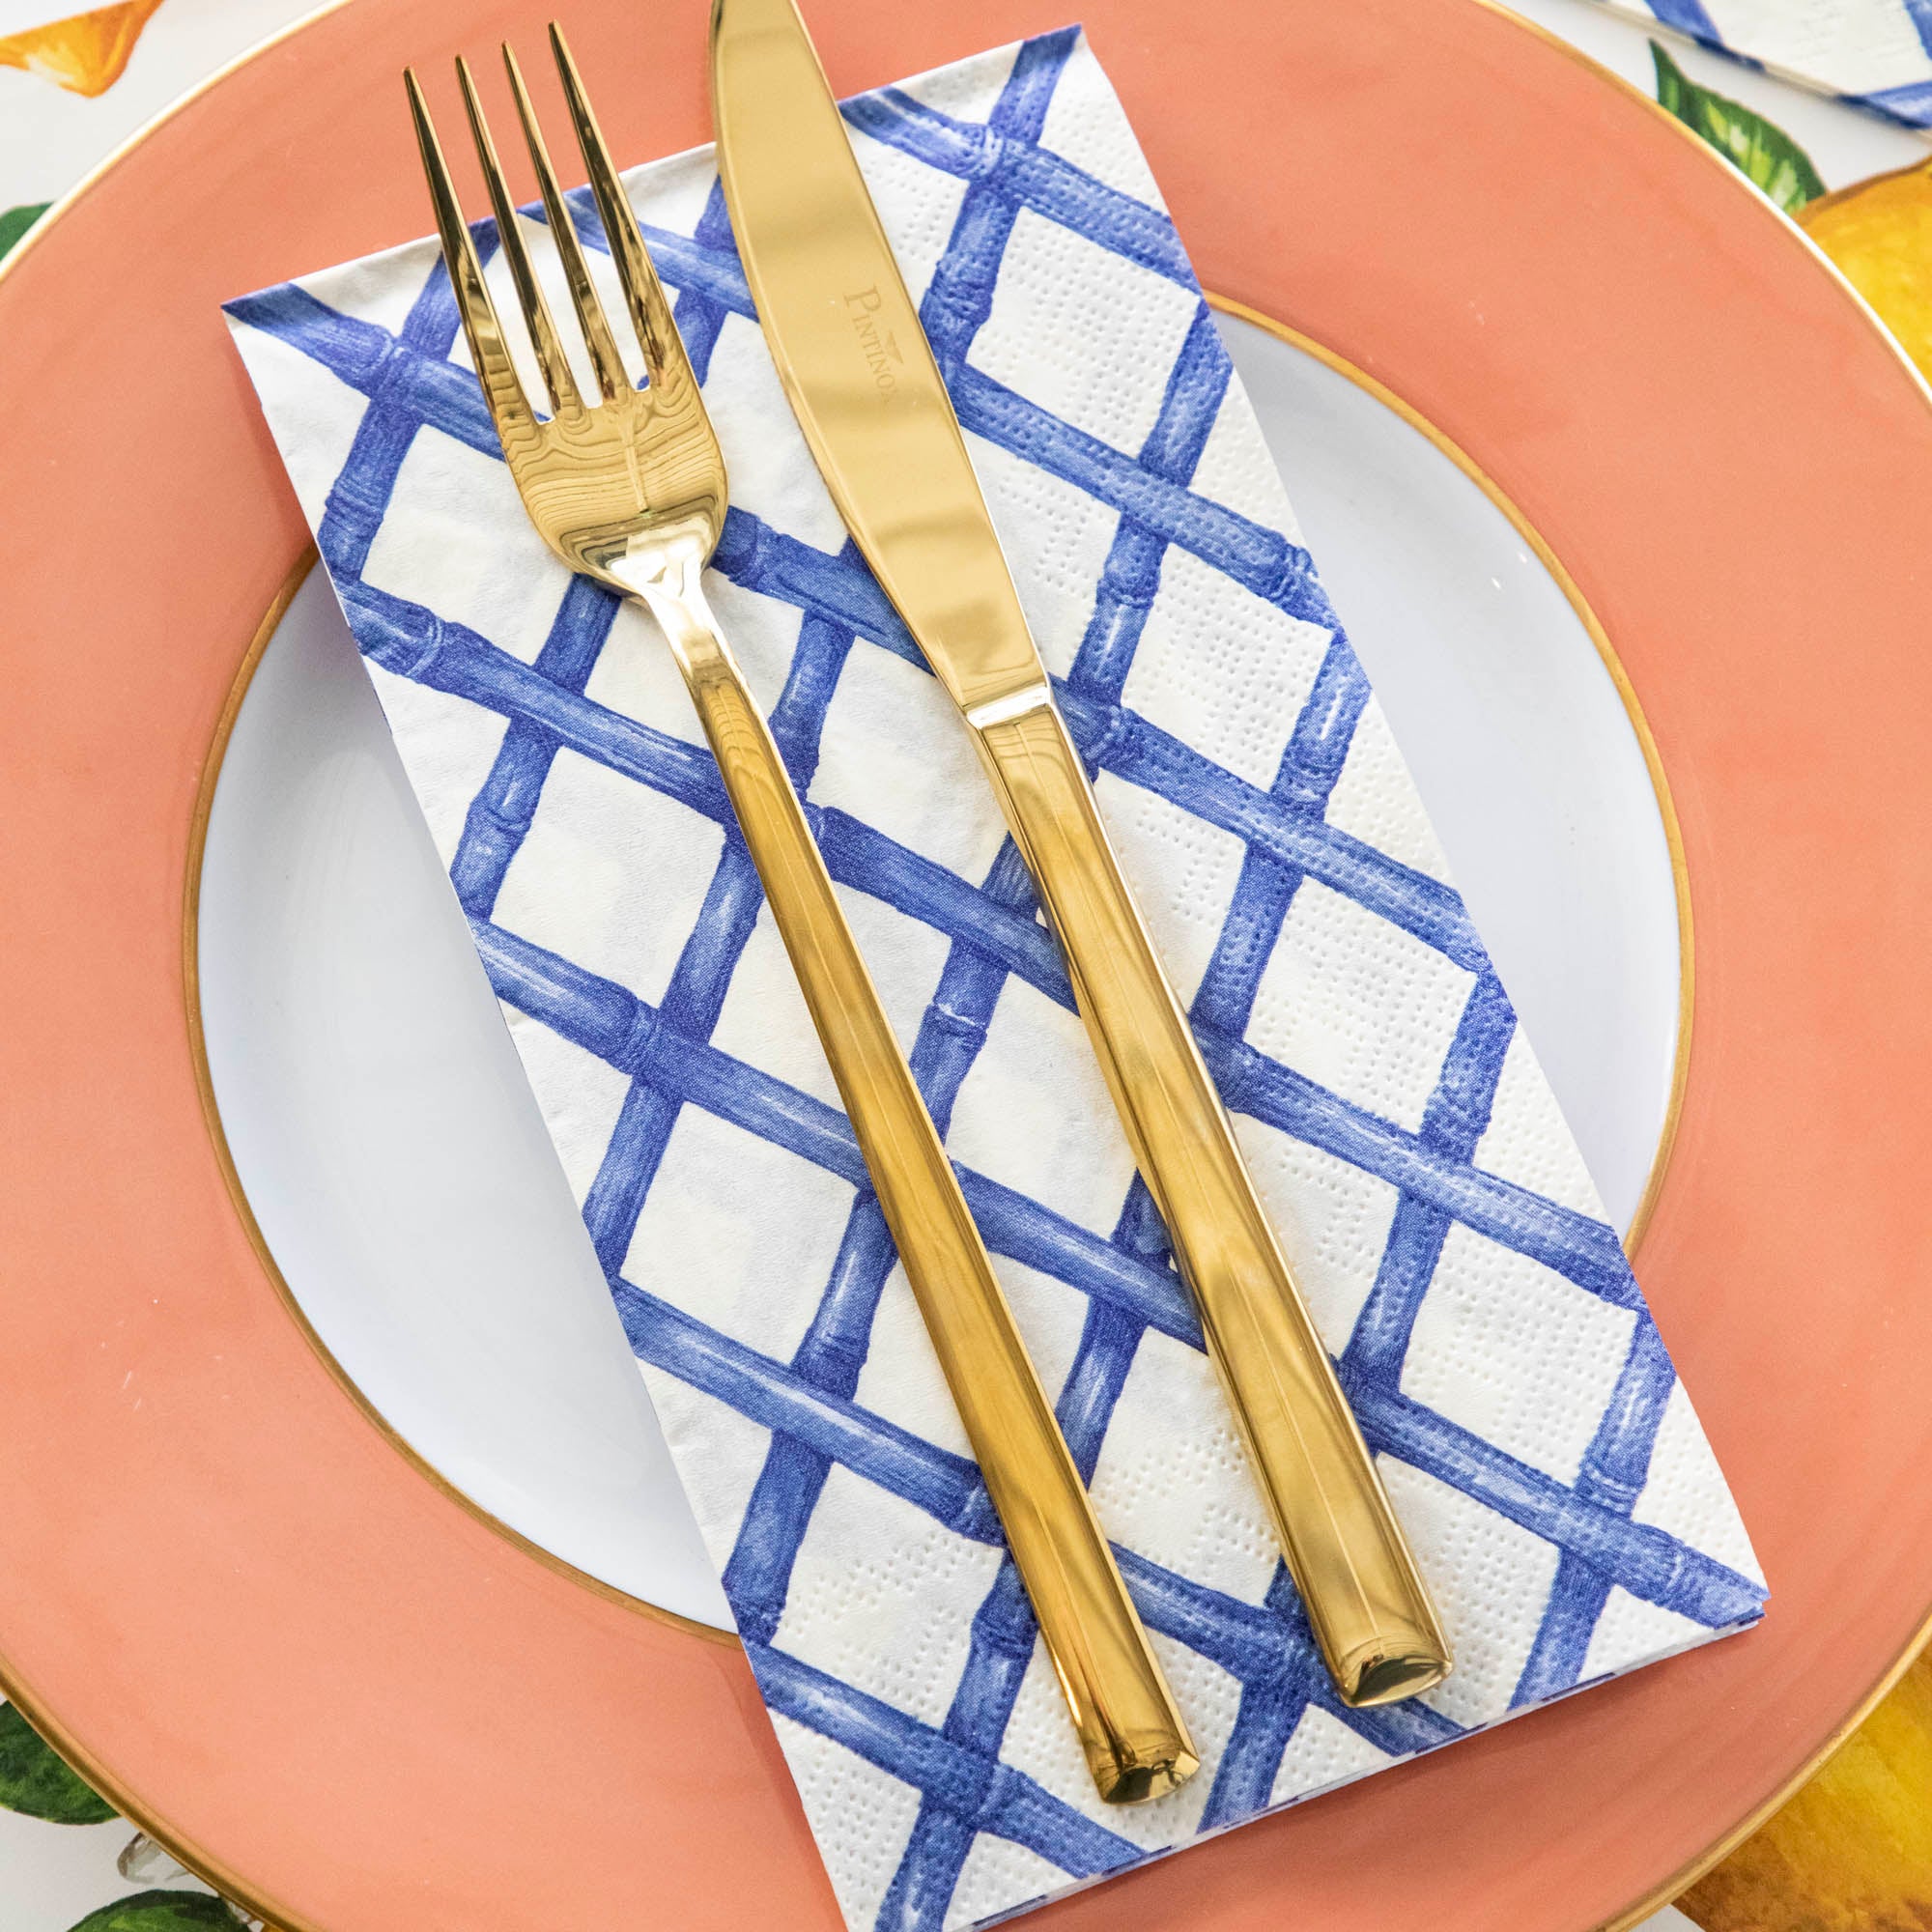 A plate with a gold fork and Blue Lattice Napkins by Hester &amp; Cook.